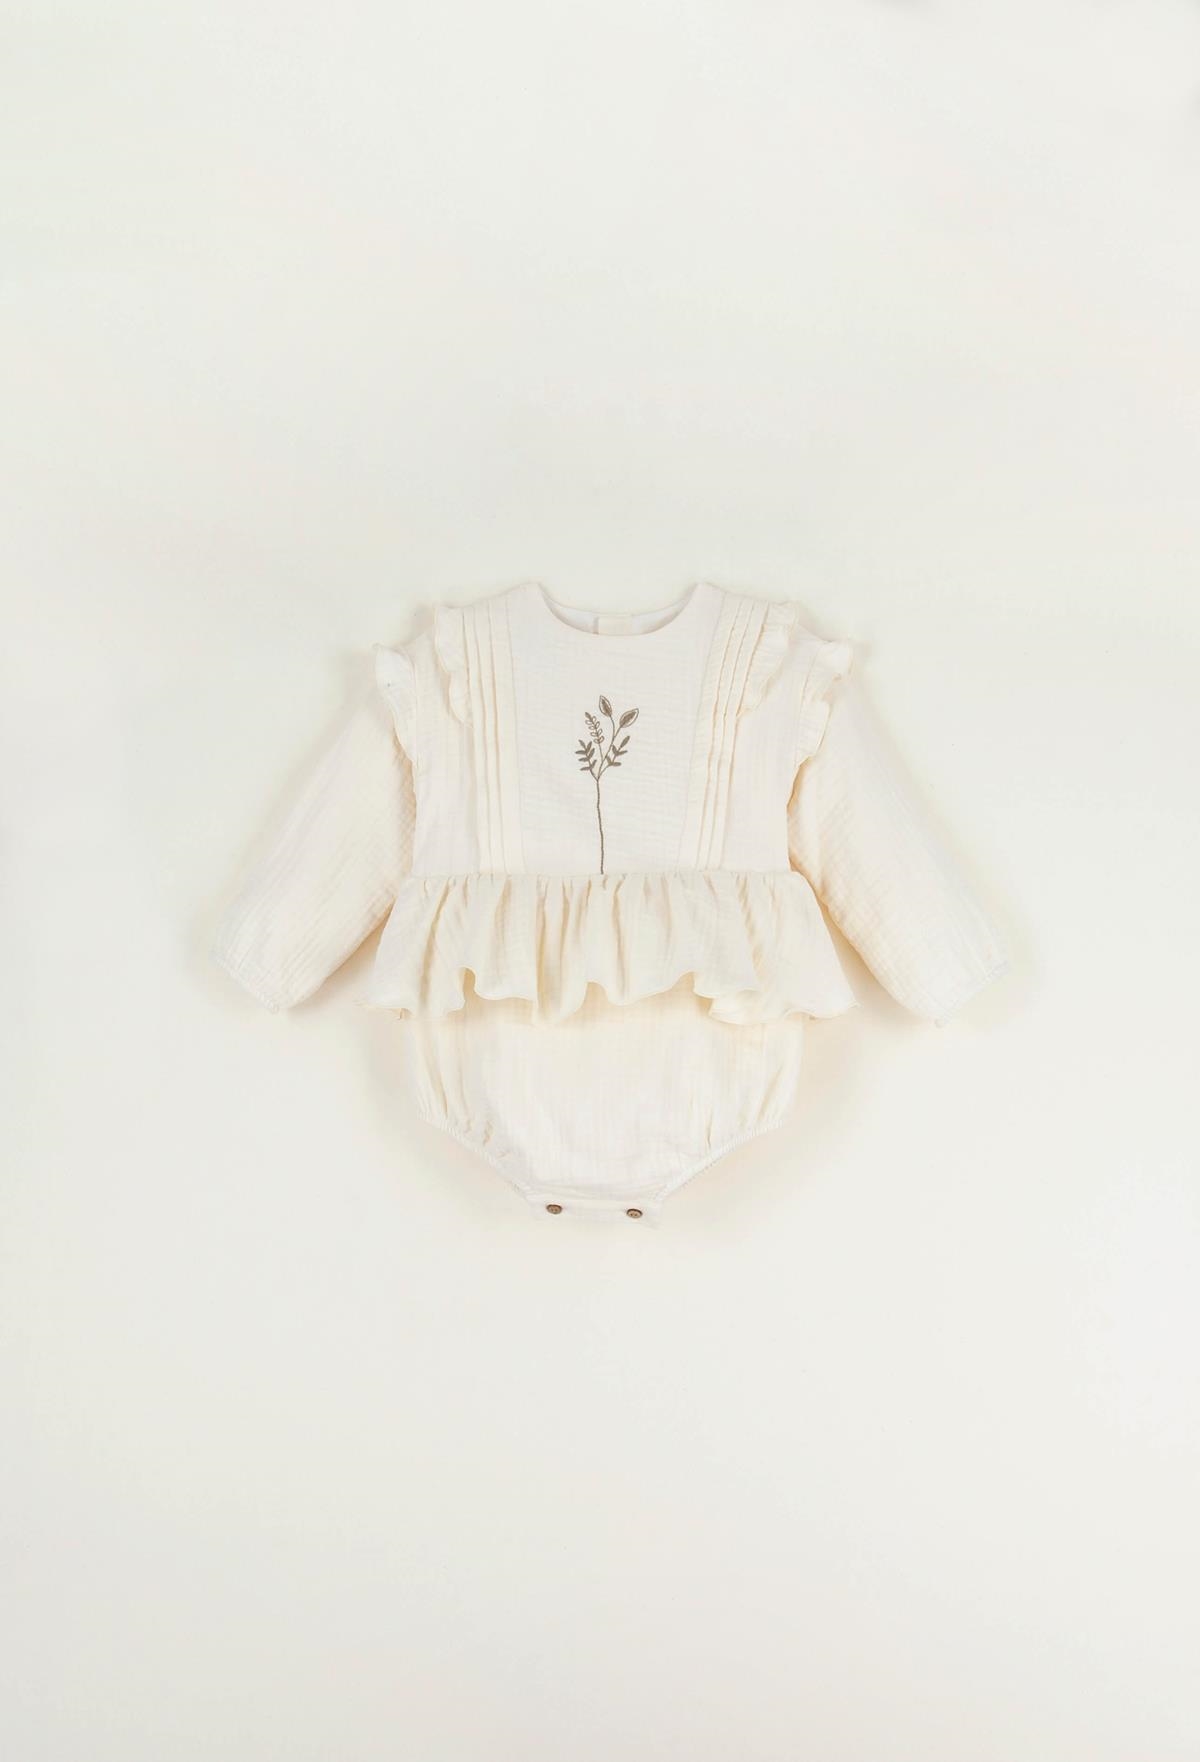 Mod.3.3 Off-white organic fabric embroidered romper suit with pintucks | AW22.23 Mod.3.3 Off-white organic fabric embroidered romper suit with pintucks